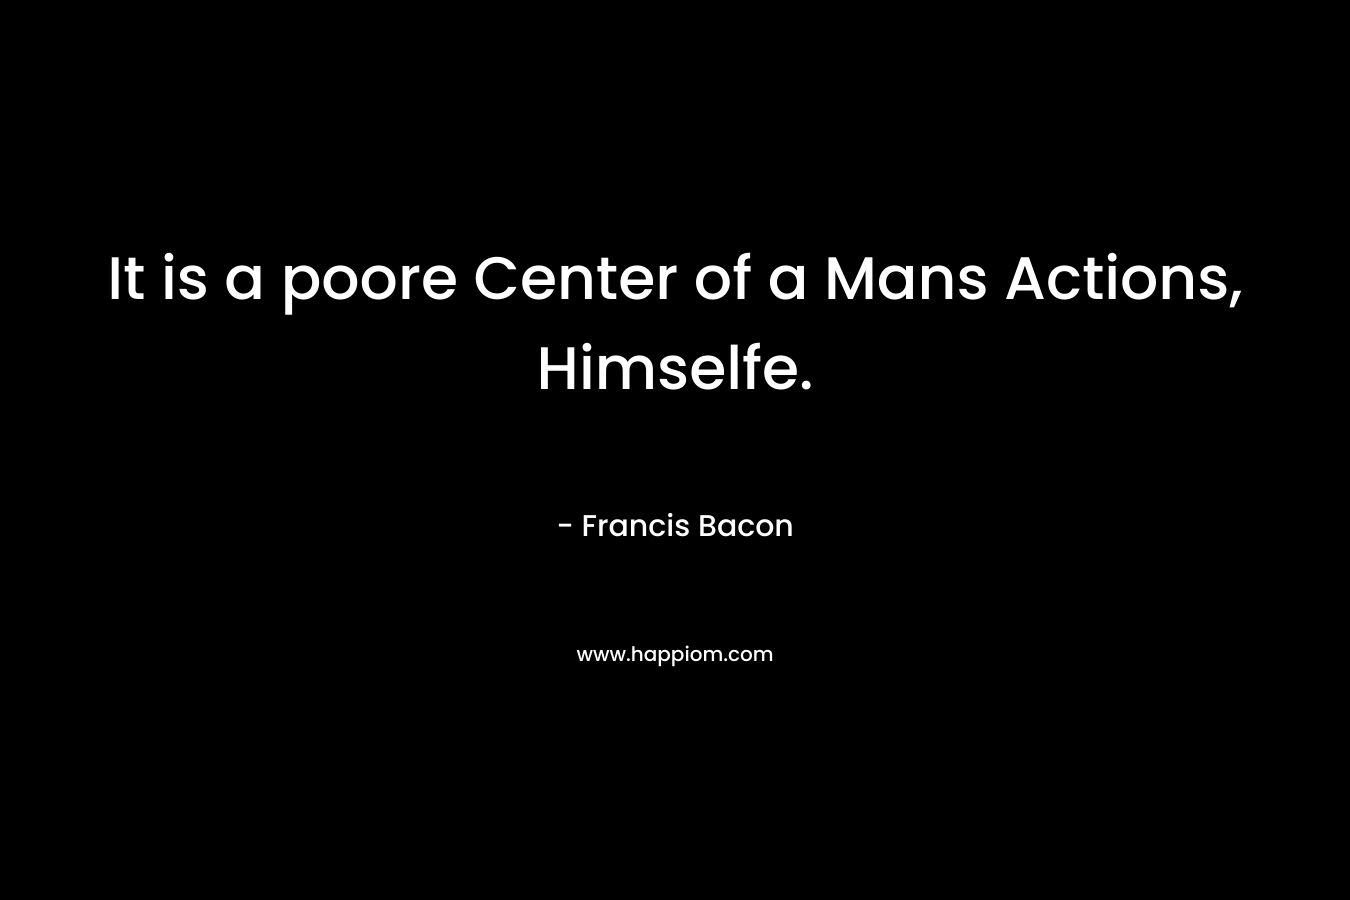 It is a poore Center of a Mans Actions, Himselfe.